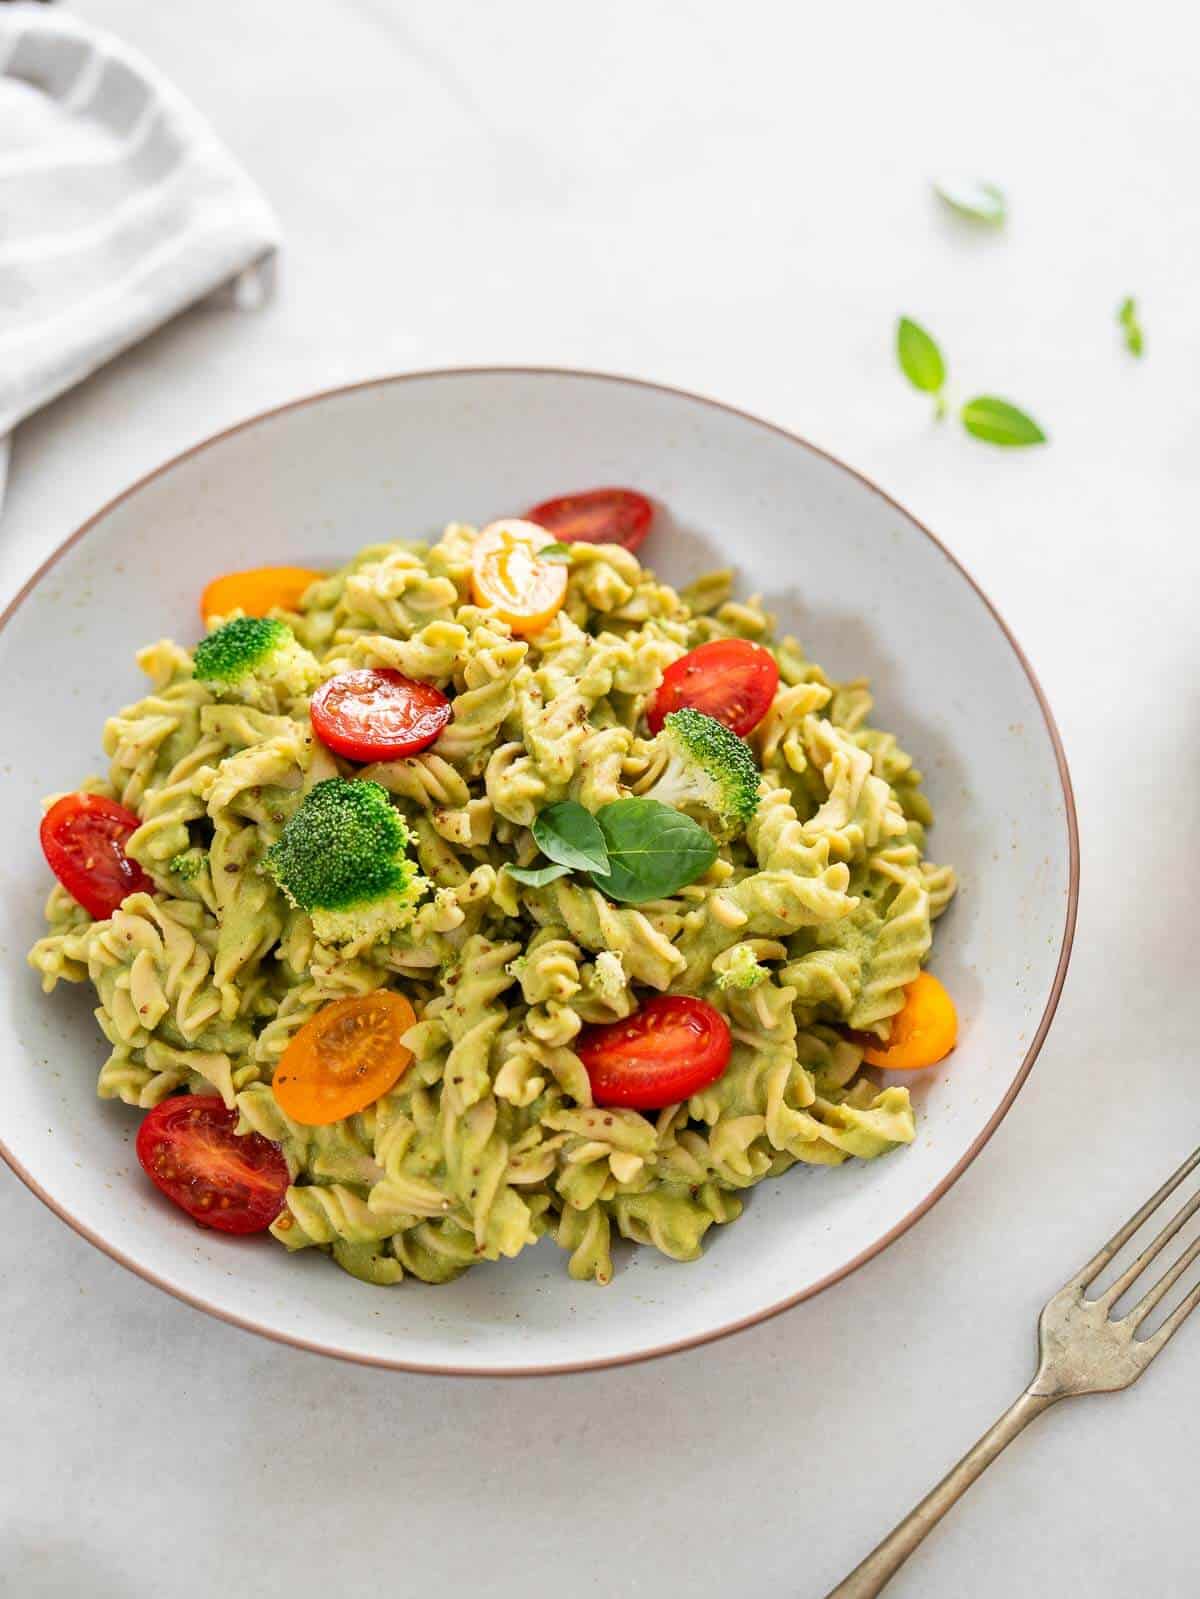 A bowl of creamy green healthy pasta salad topped with cherry tomatoes, broccoli florets, and fresh basil,